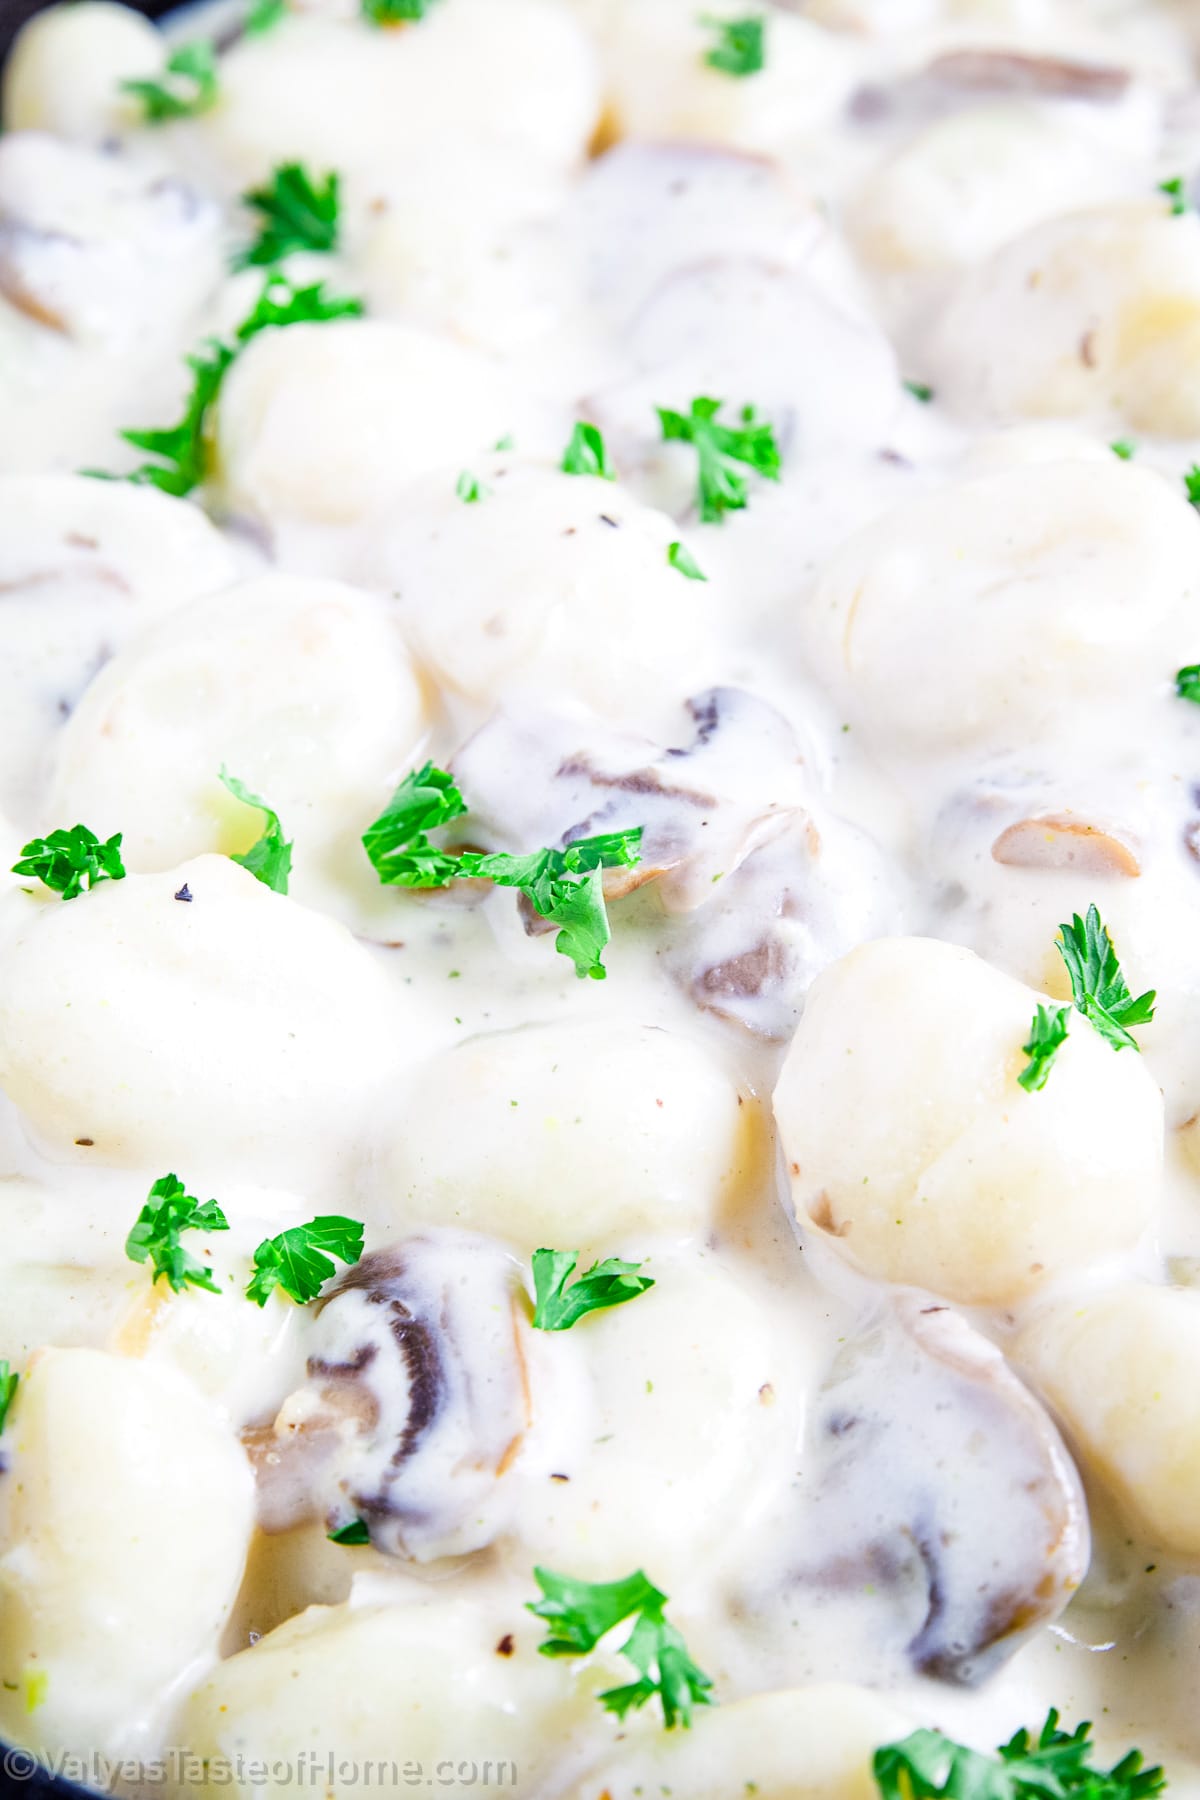 The combination of the soft, pillowy gnocchi and the tender, flavorful mushrooms, all smothered in creamy sauce, is simply irresistible.